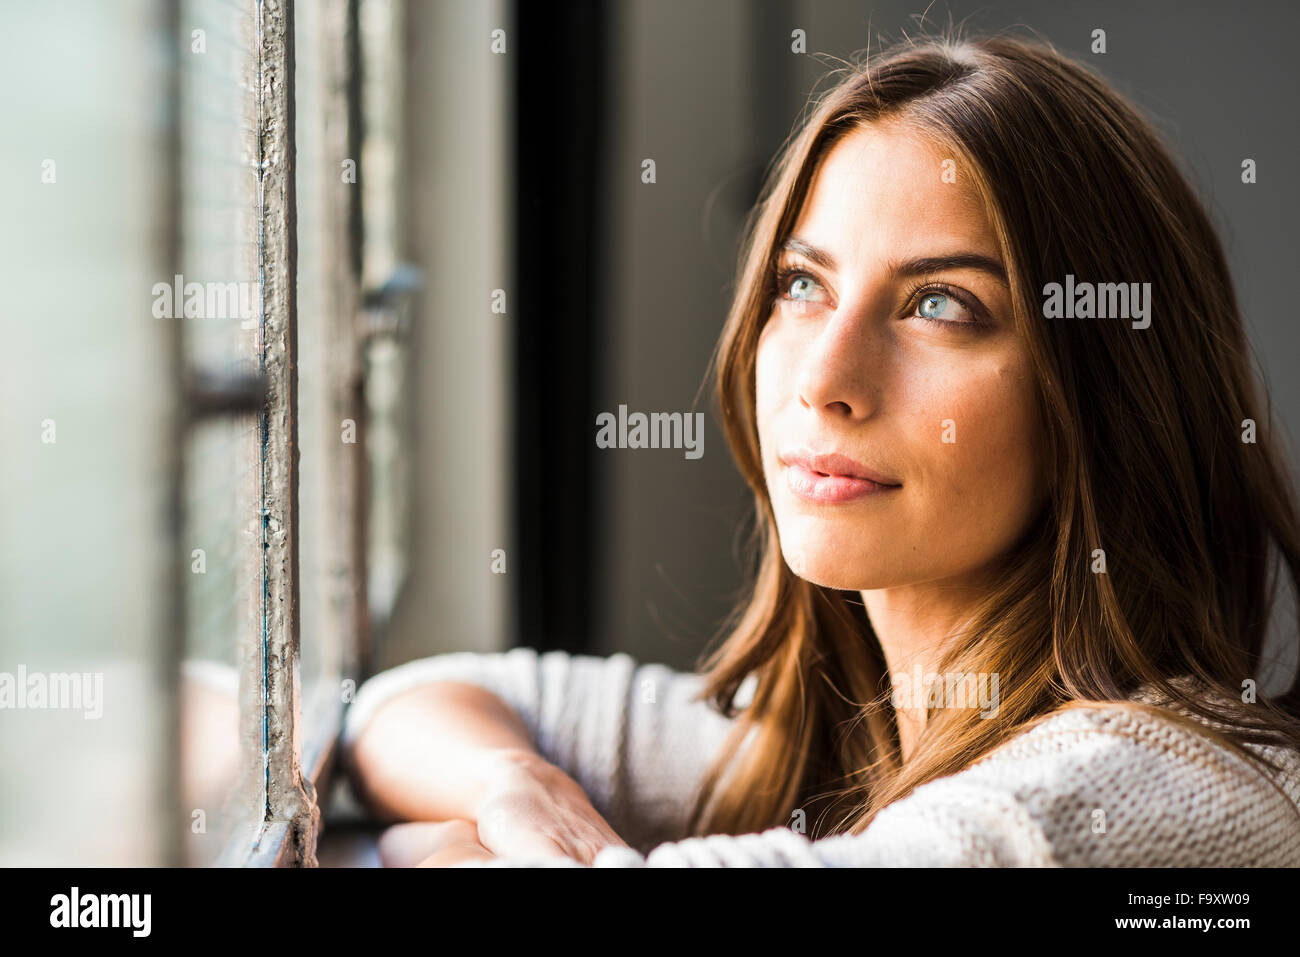 Brunette woman looking out of window Stock Photo